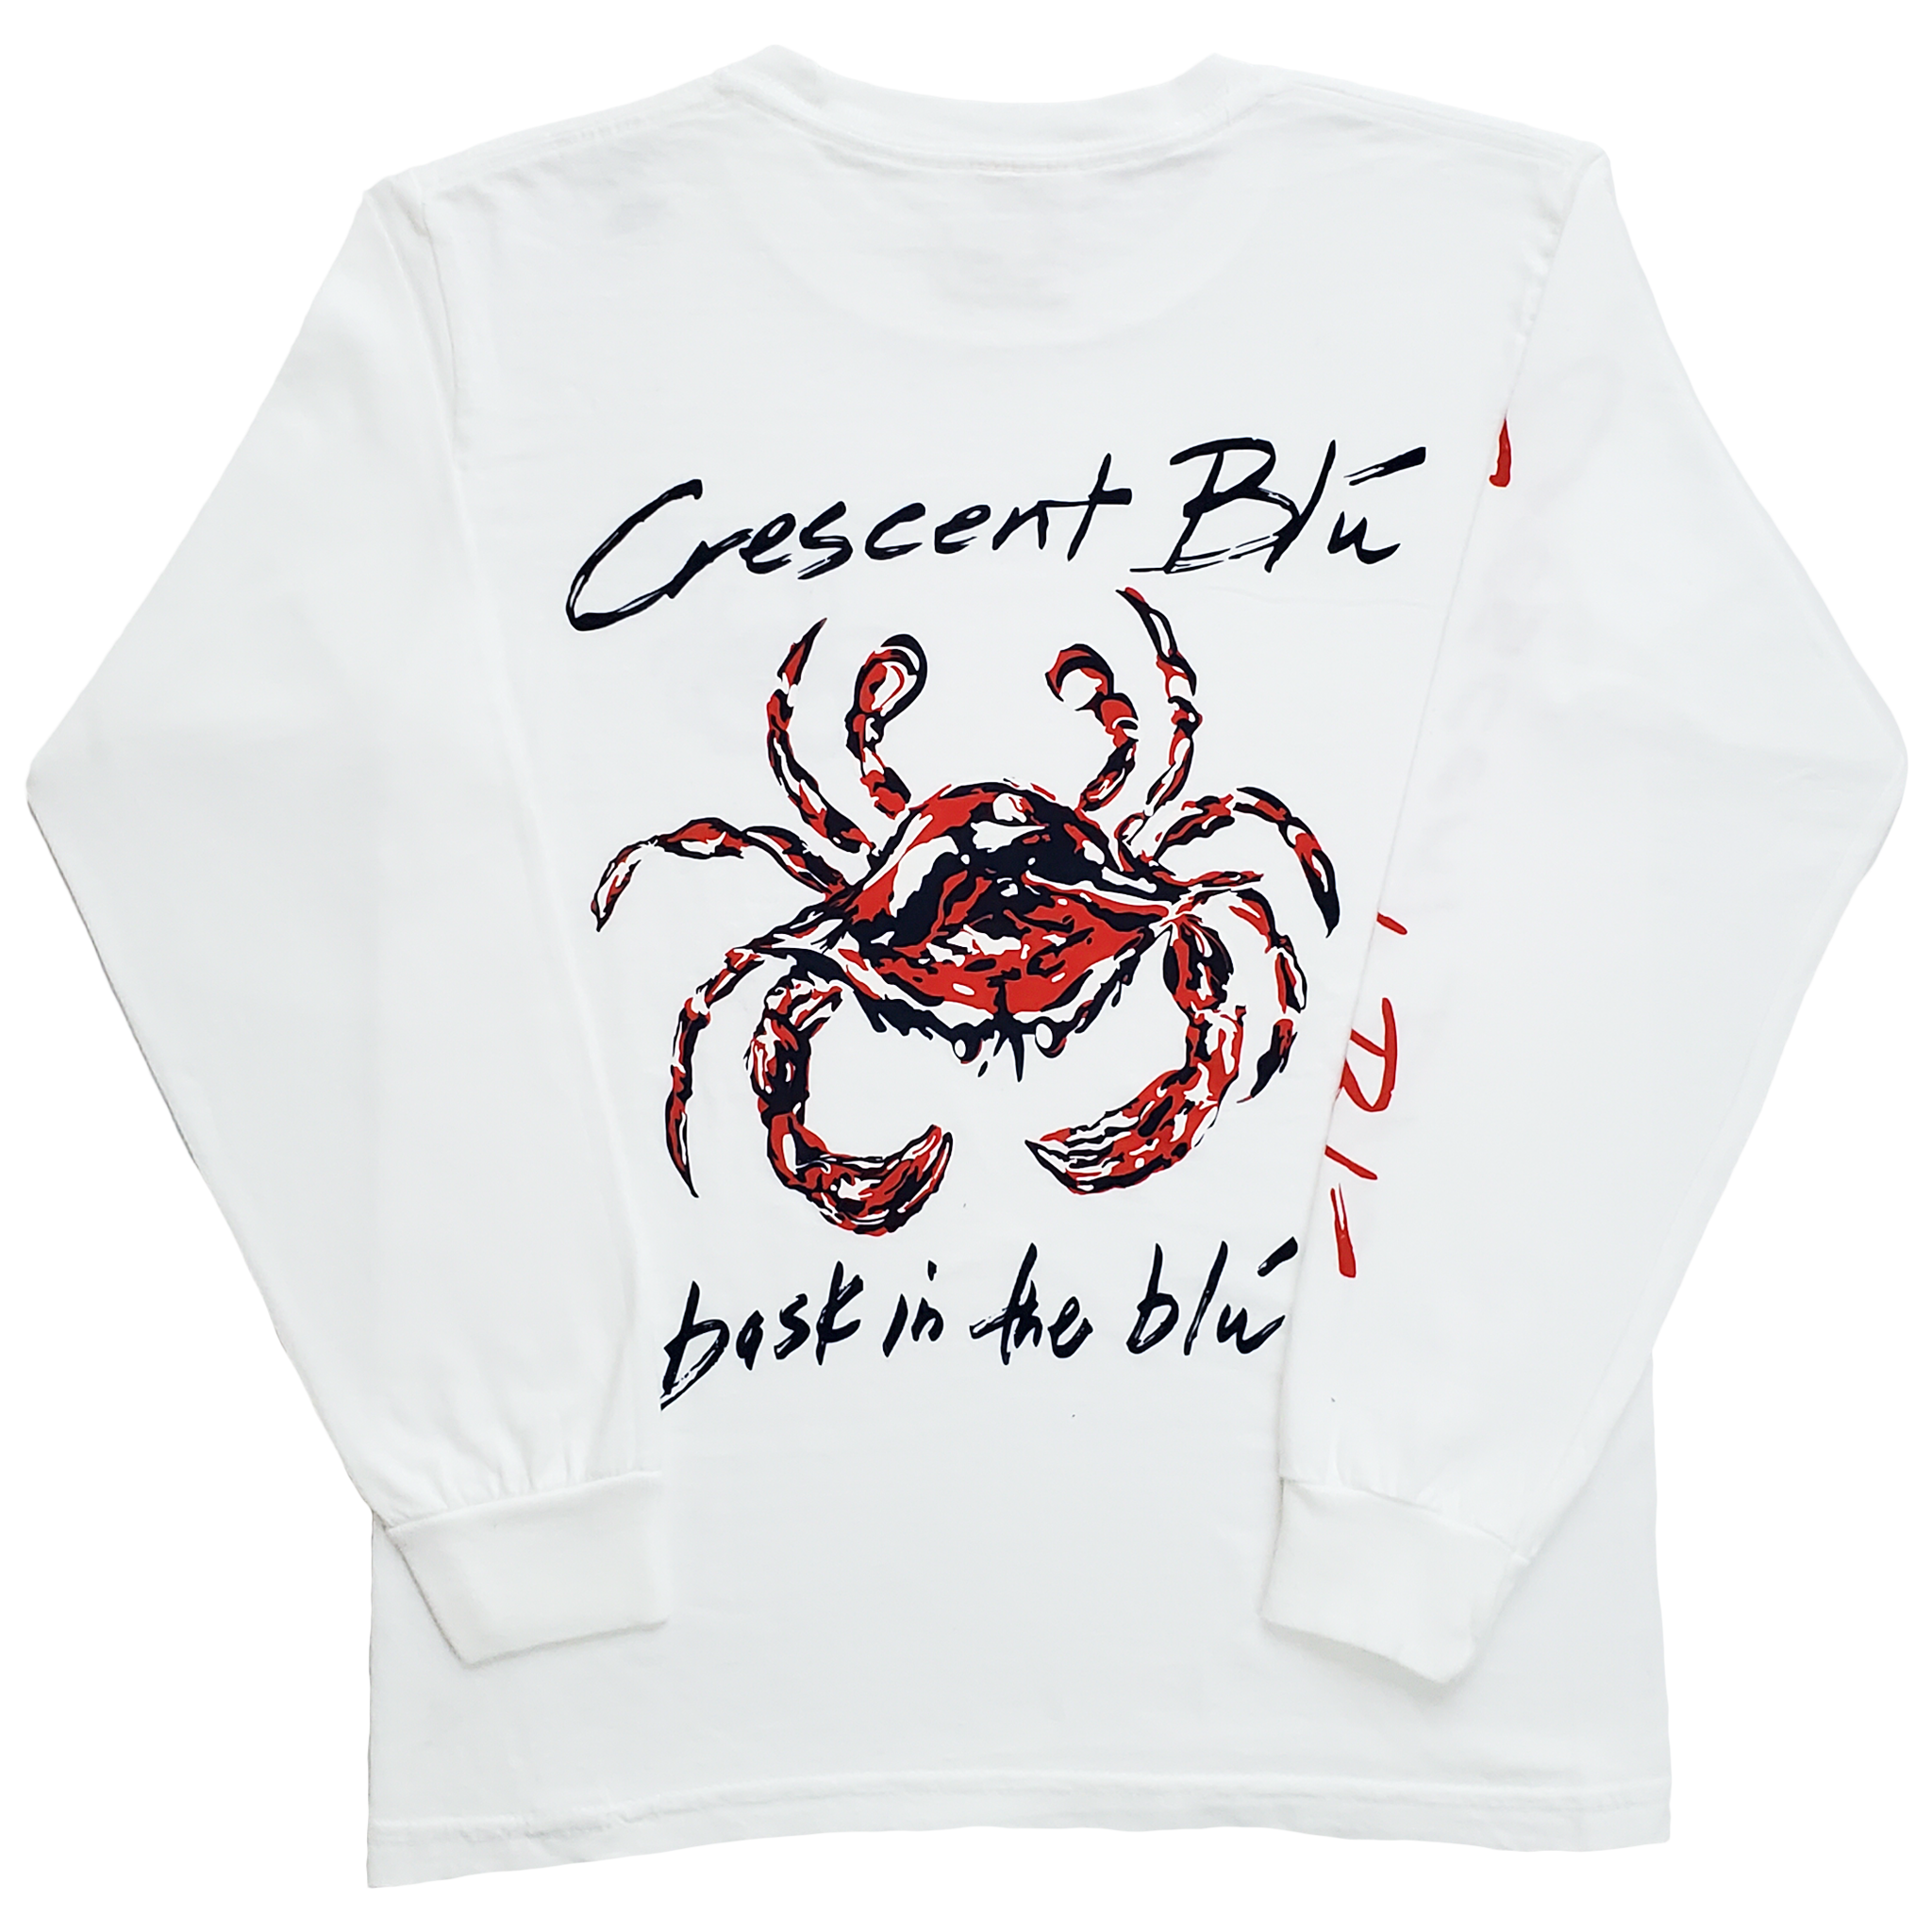 White long sleeve t-shirt with a red, white, and blue crab centered on the back between the words Crescent Blú and bask in the blu.